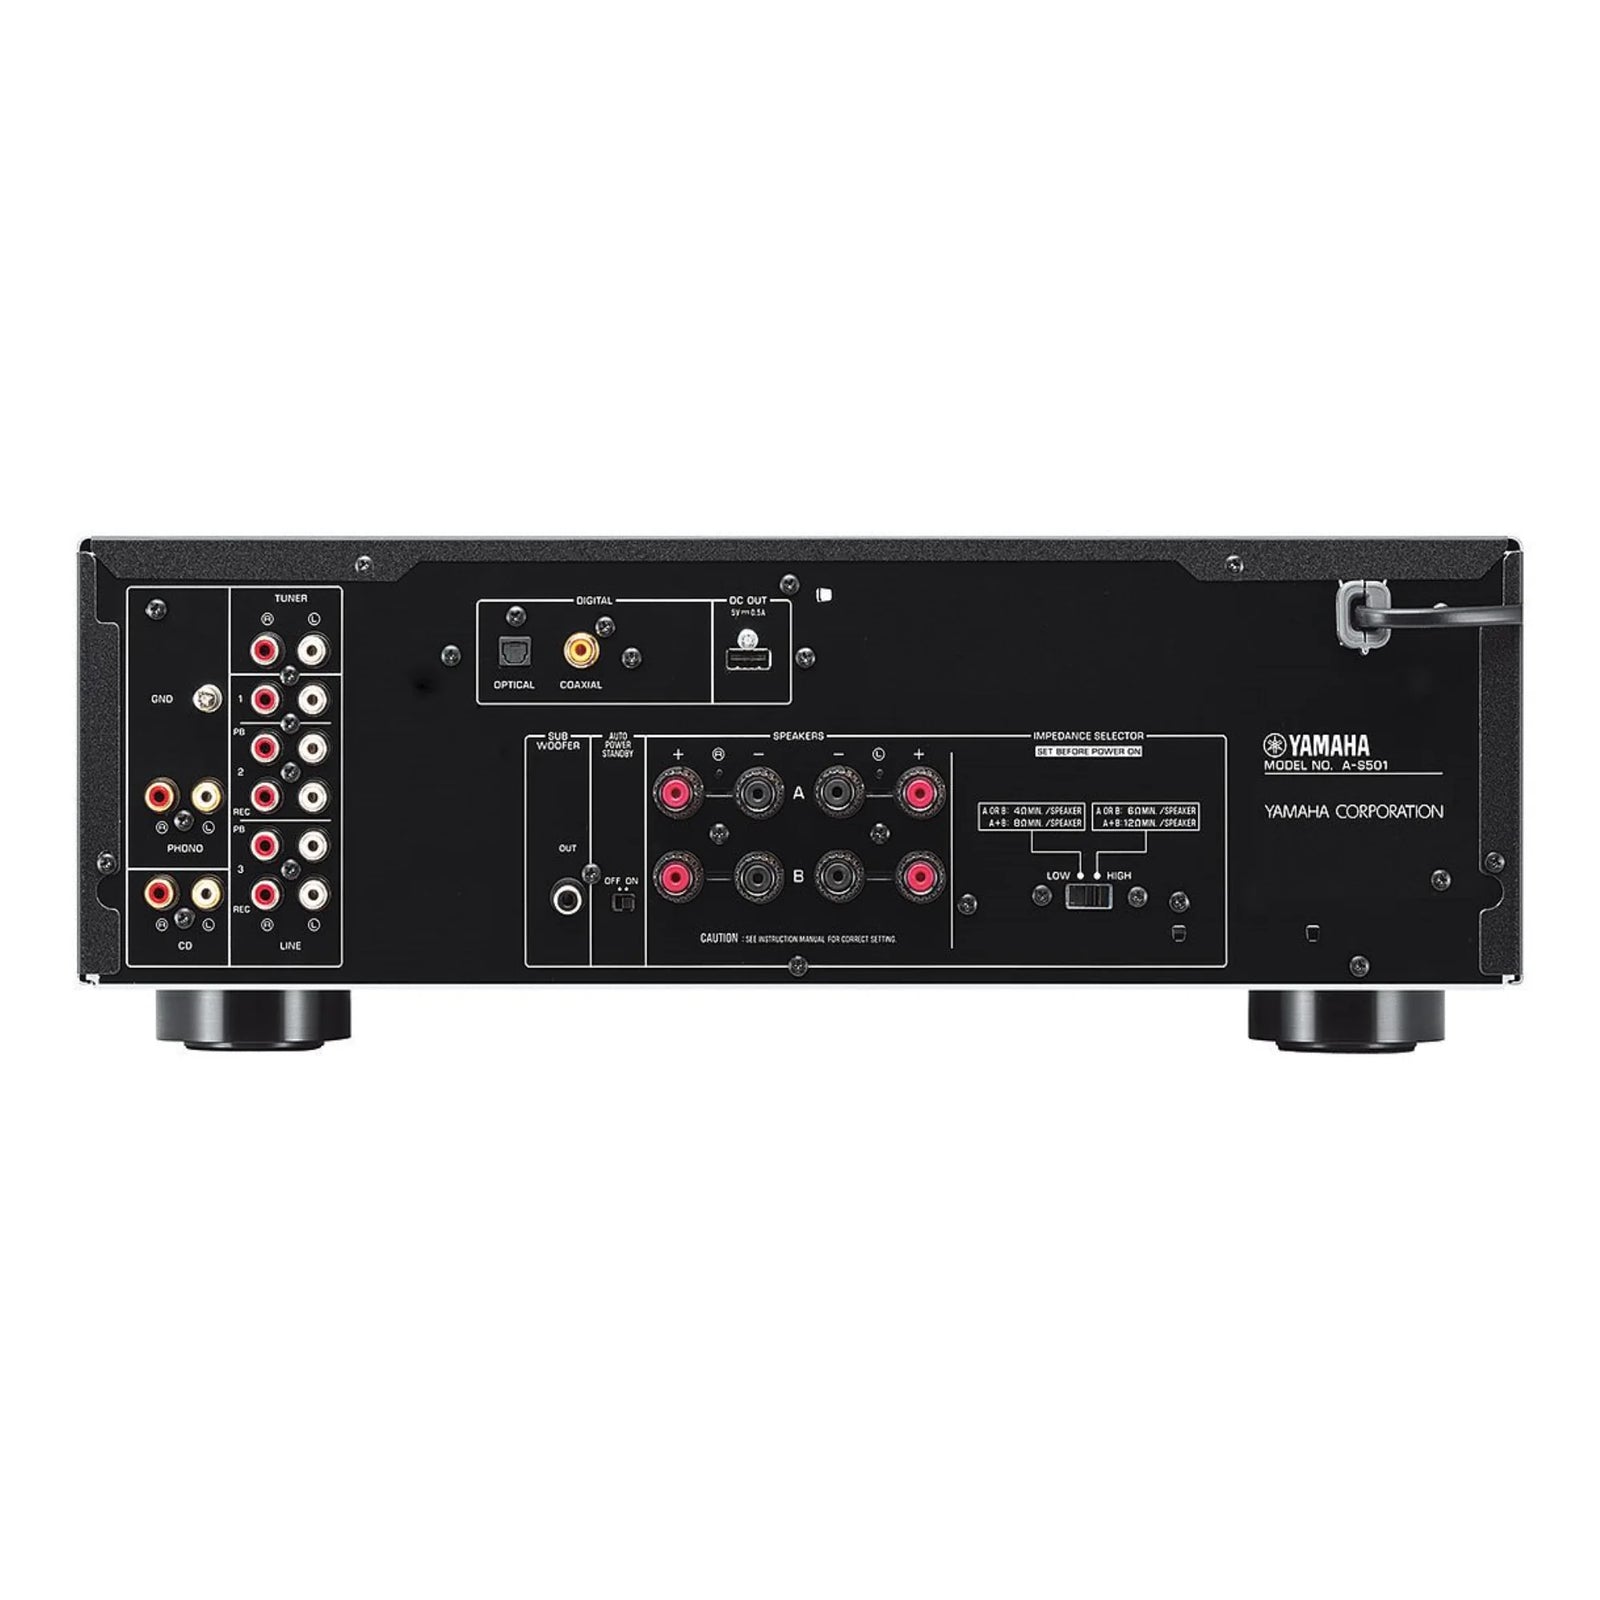 YAMAHA A-S501  - INTEGRATED AMPLIFIERS | VINYL SOUND Impressively high sound quality with a wide range of features and an elegant appearance. An integrated amplifier with the advantage of digital input. ToP-ART (Total Purity Audio Reproduction Technology) and high quality parts - I/O (input to output) Direct Symmetrical Design - ART